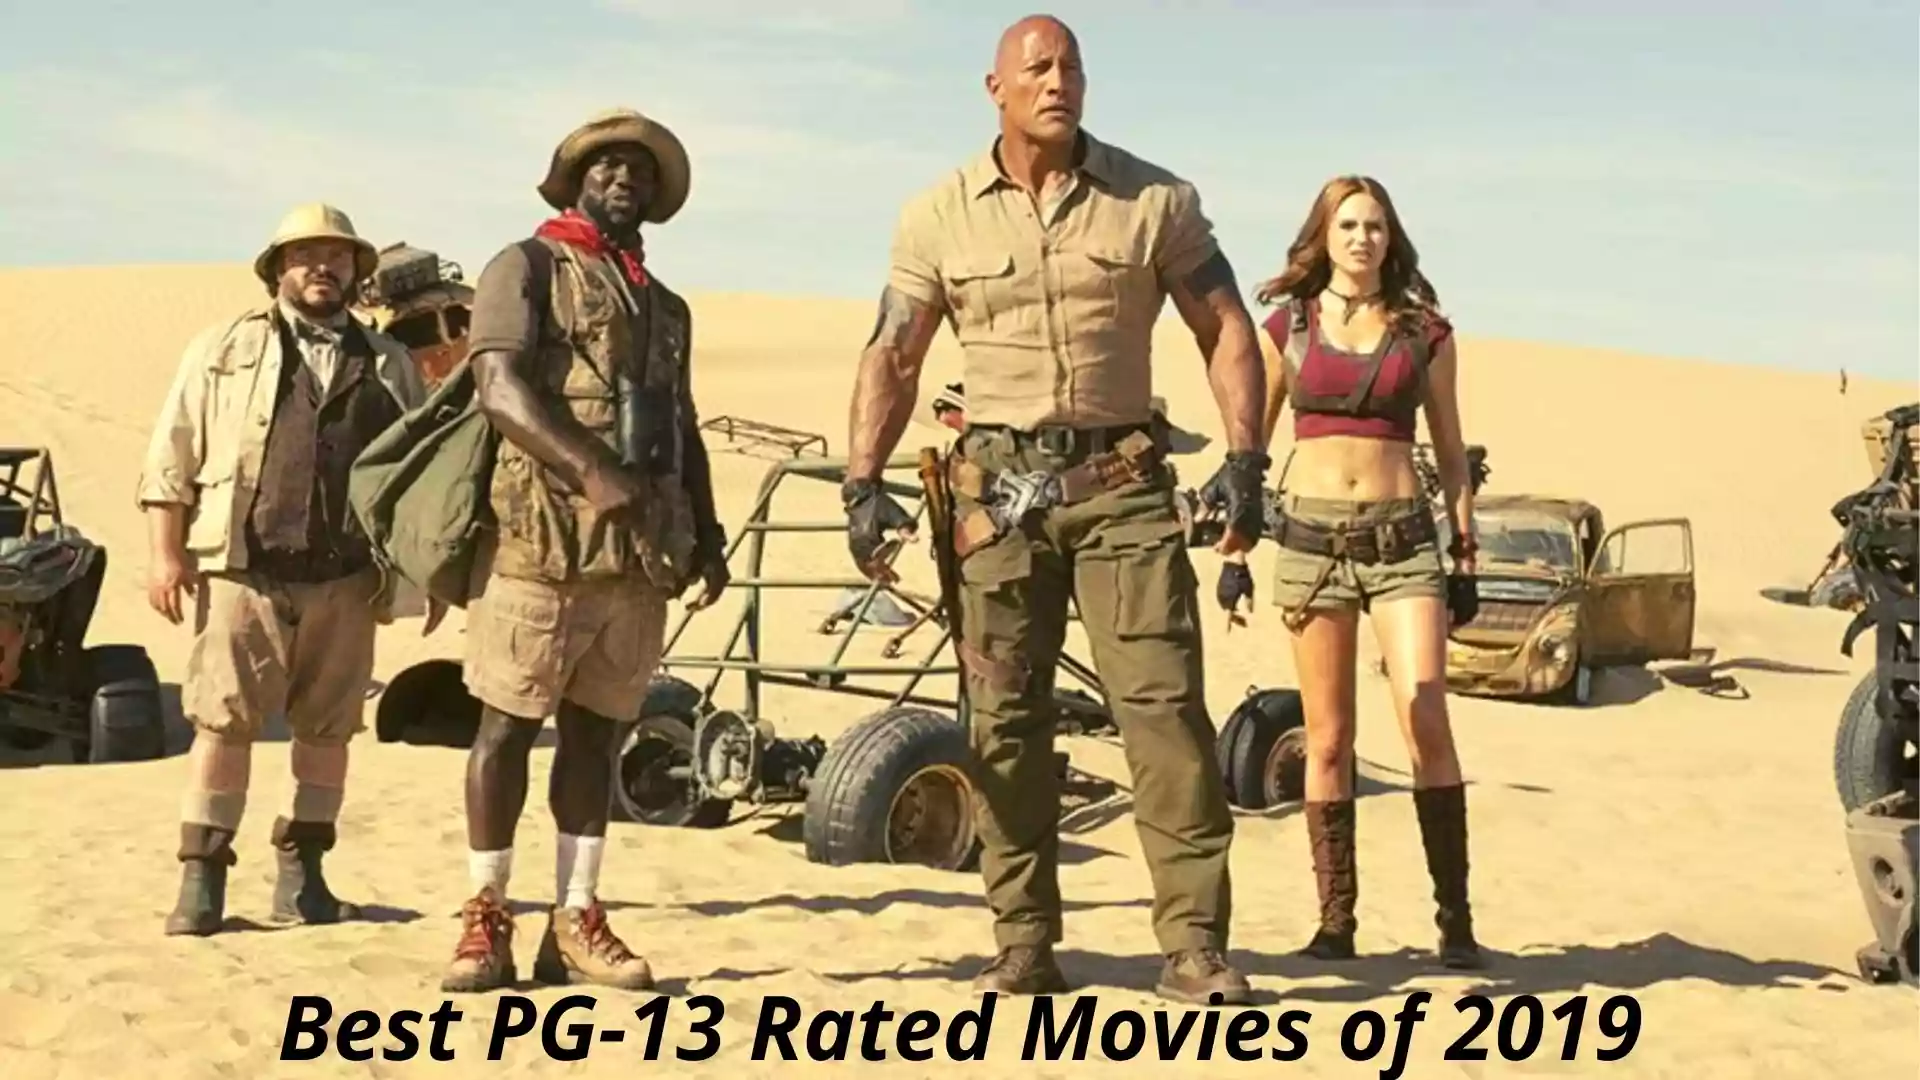 Best PG-13 Rated Movies of 2019